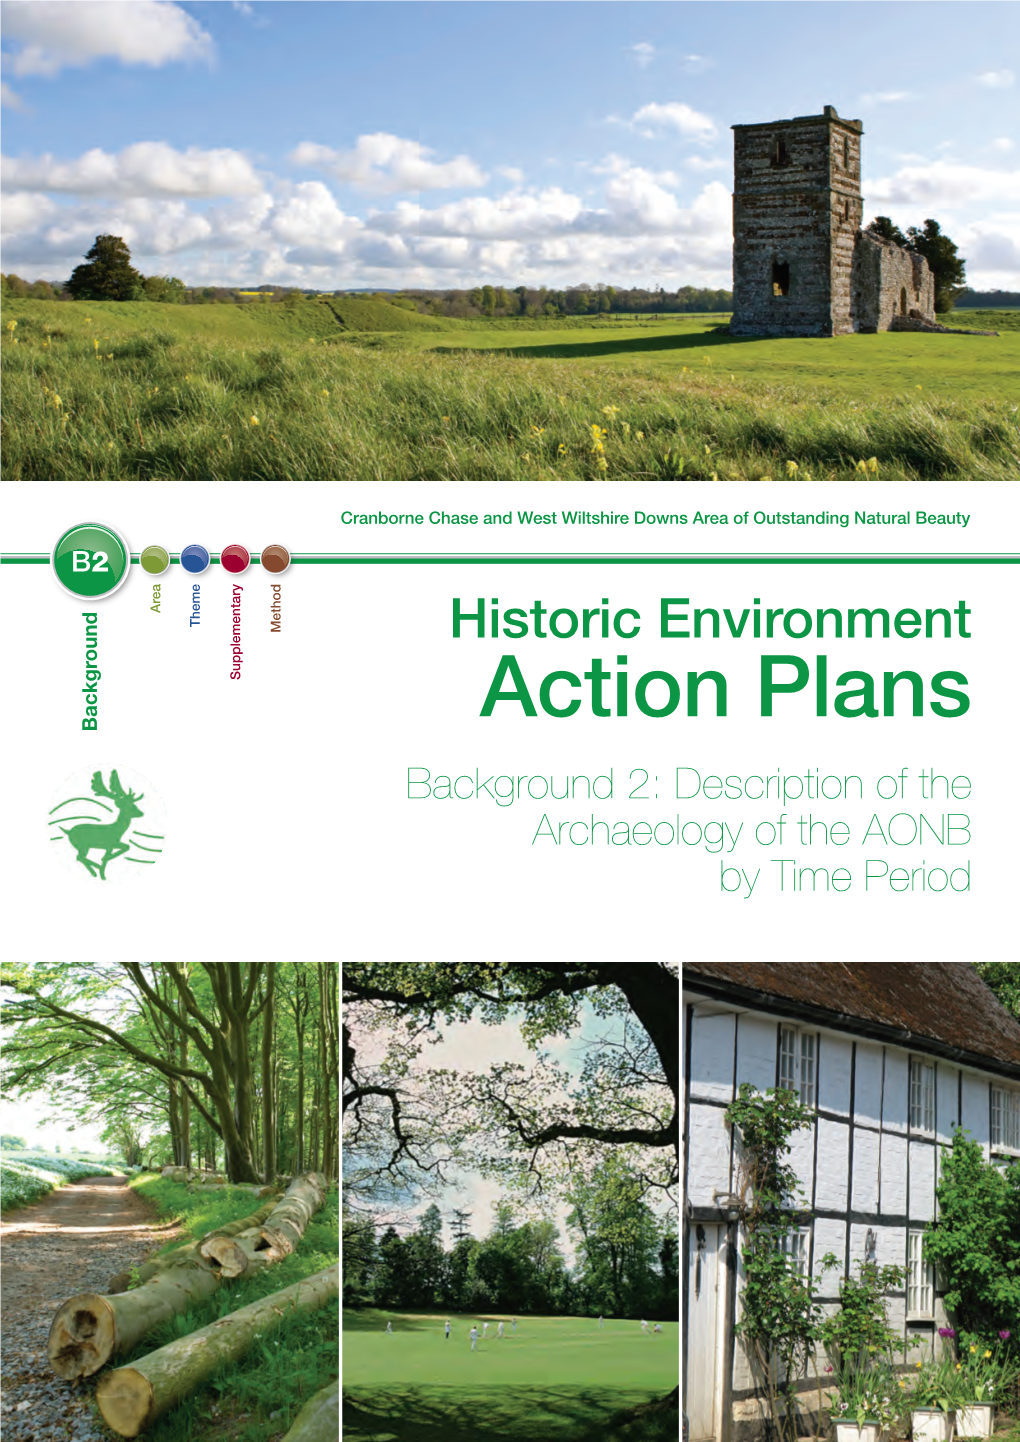 Description of the Archaeology of the AONB by Time Period